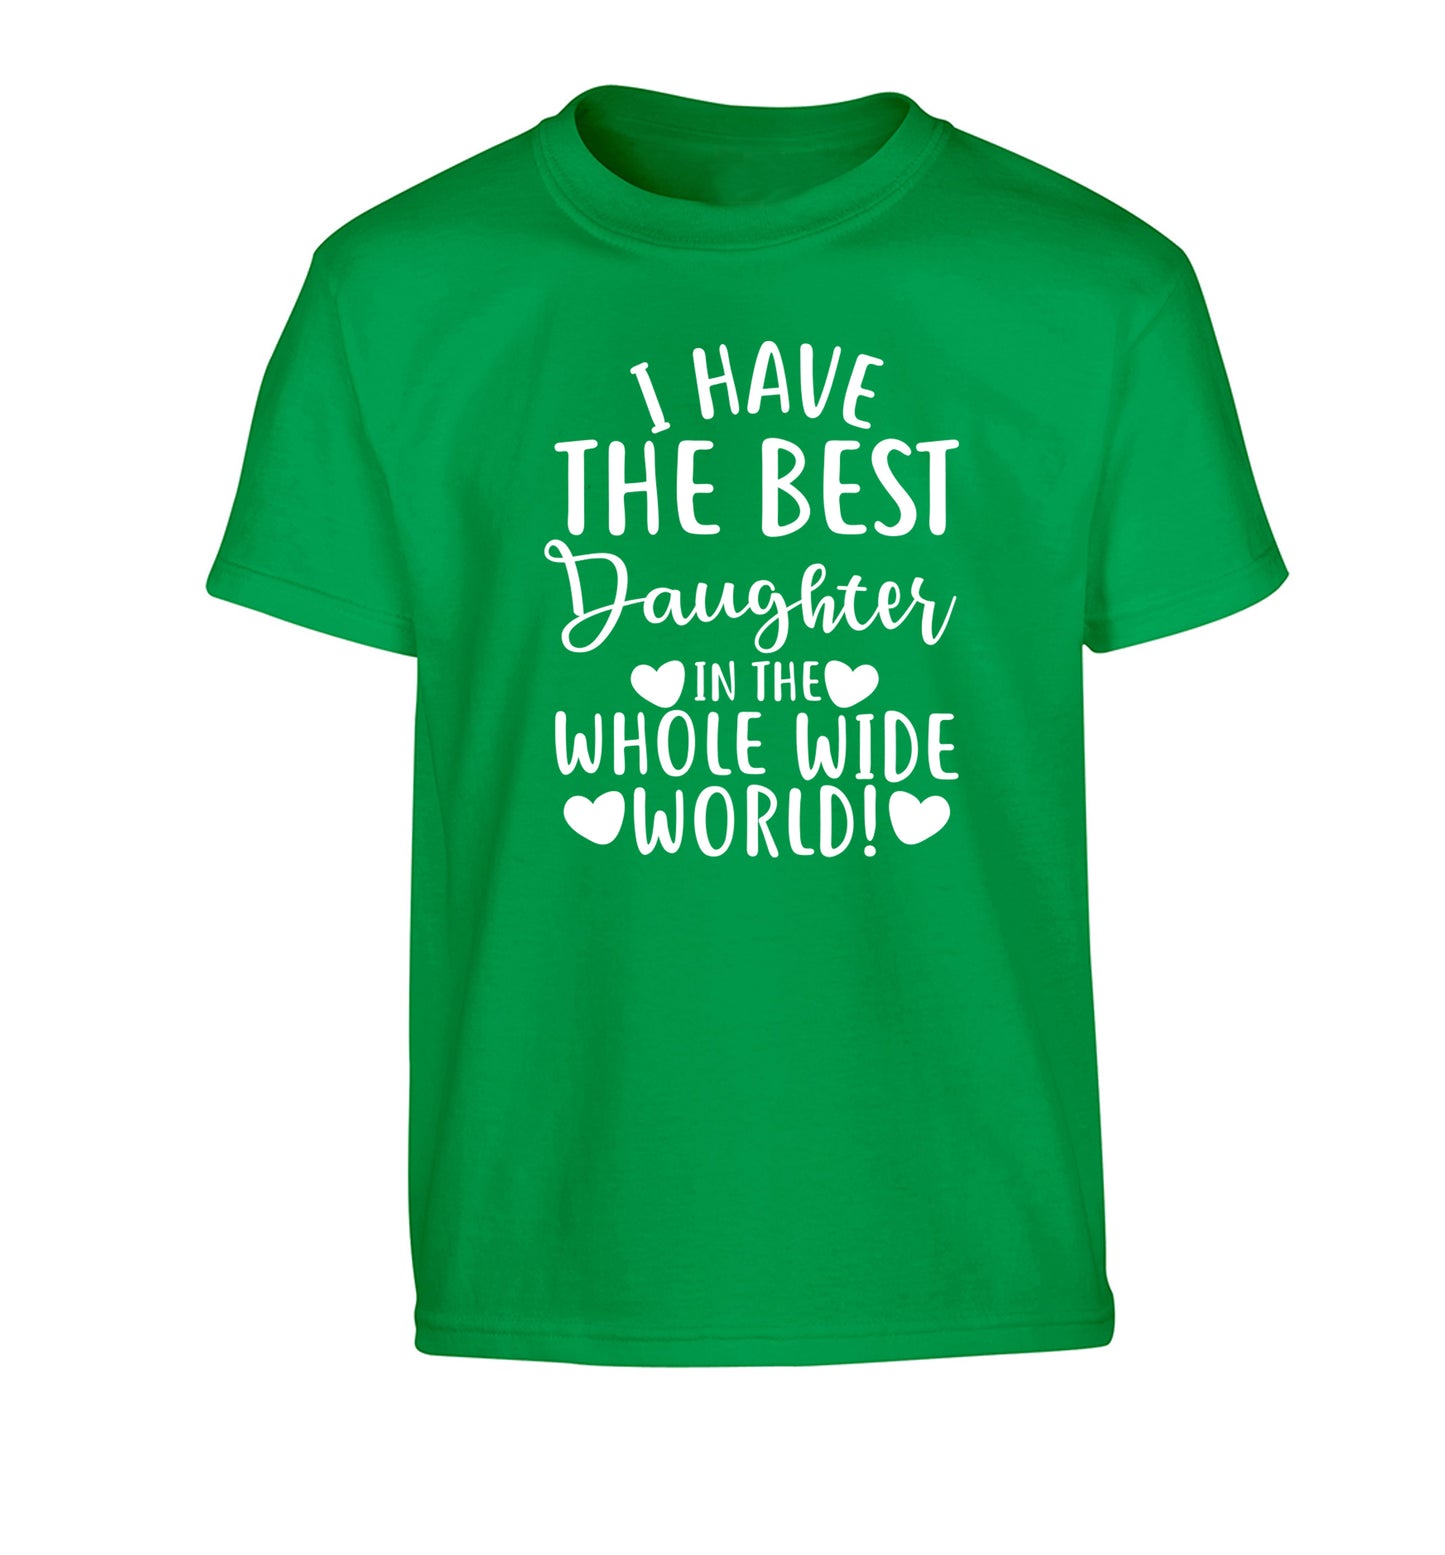 I have the best daughter in the whole wide world! Children's green Tshirt 12-13 Years